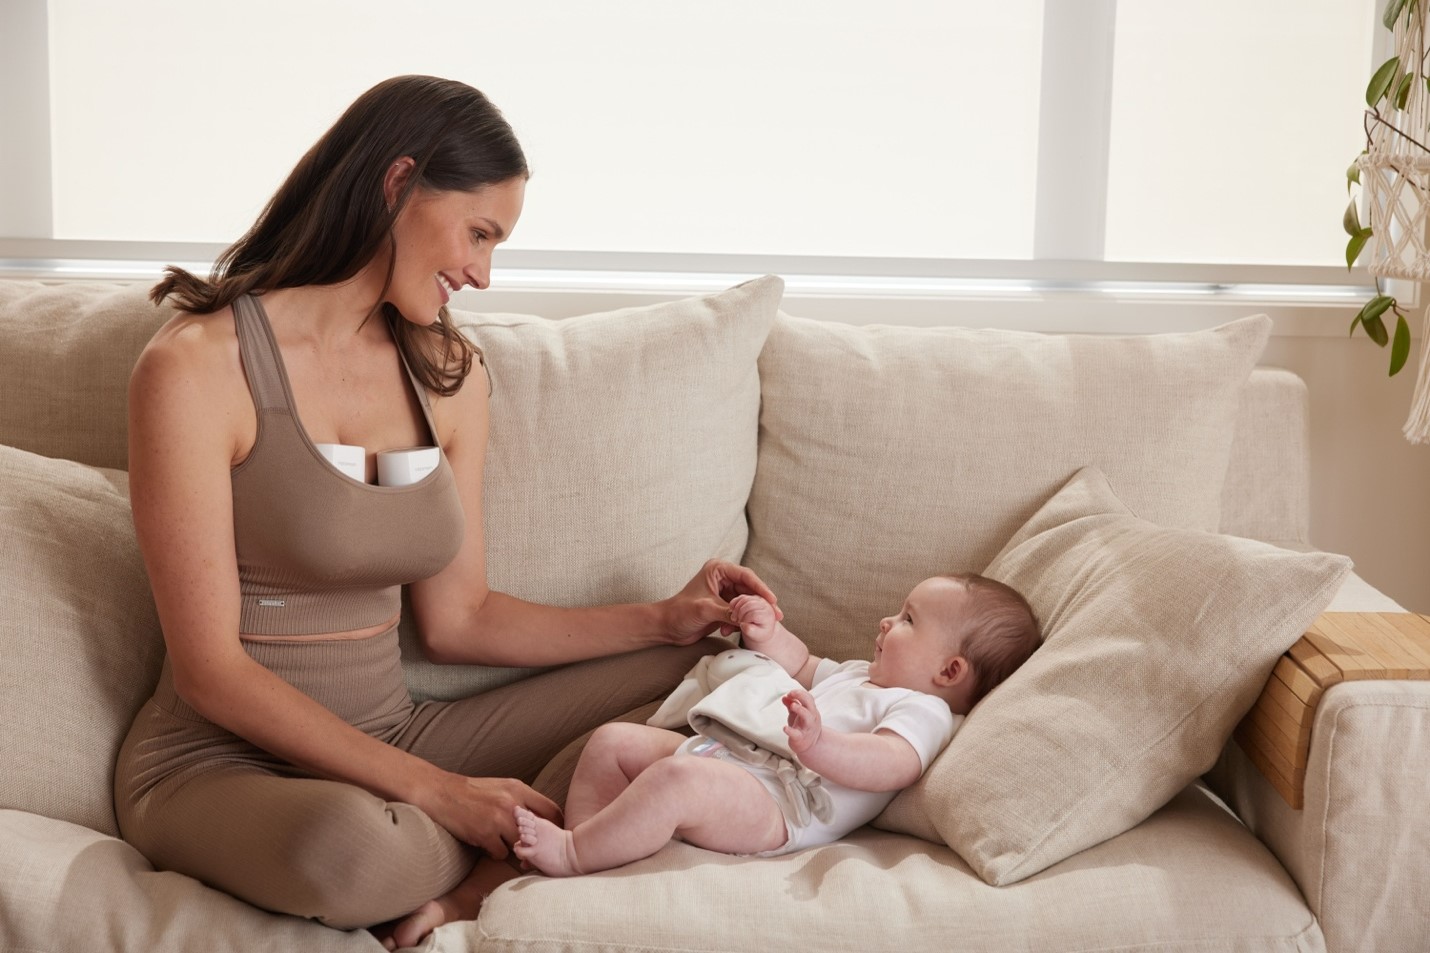 Momcozy Wearable Electric Breast Pump S12